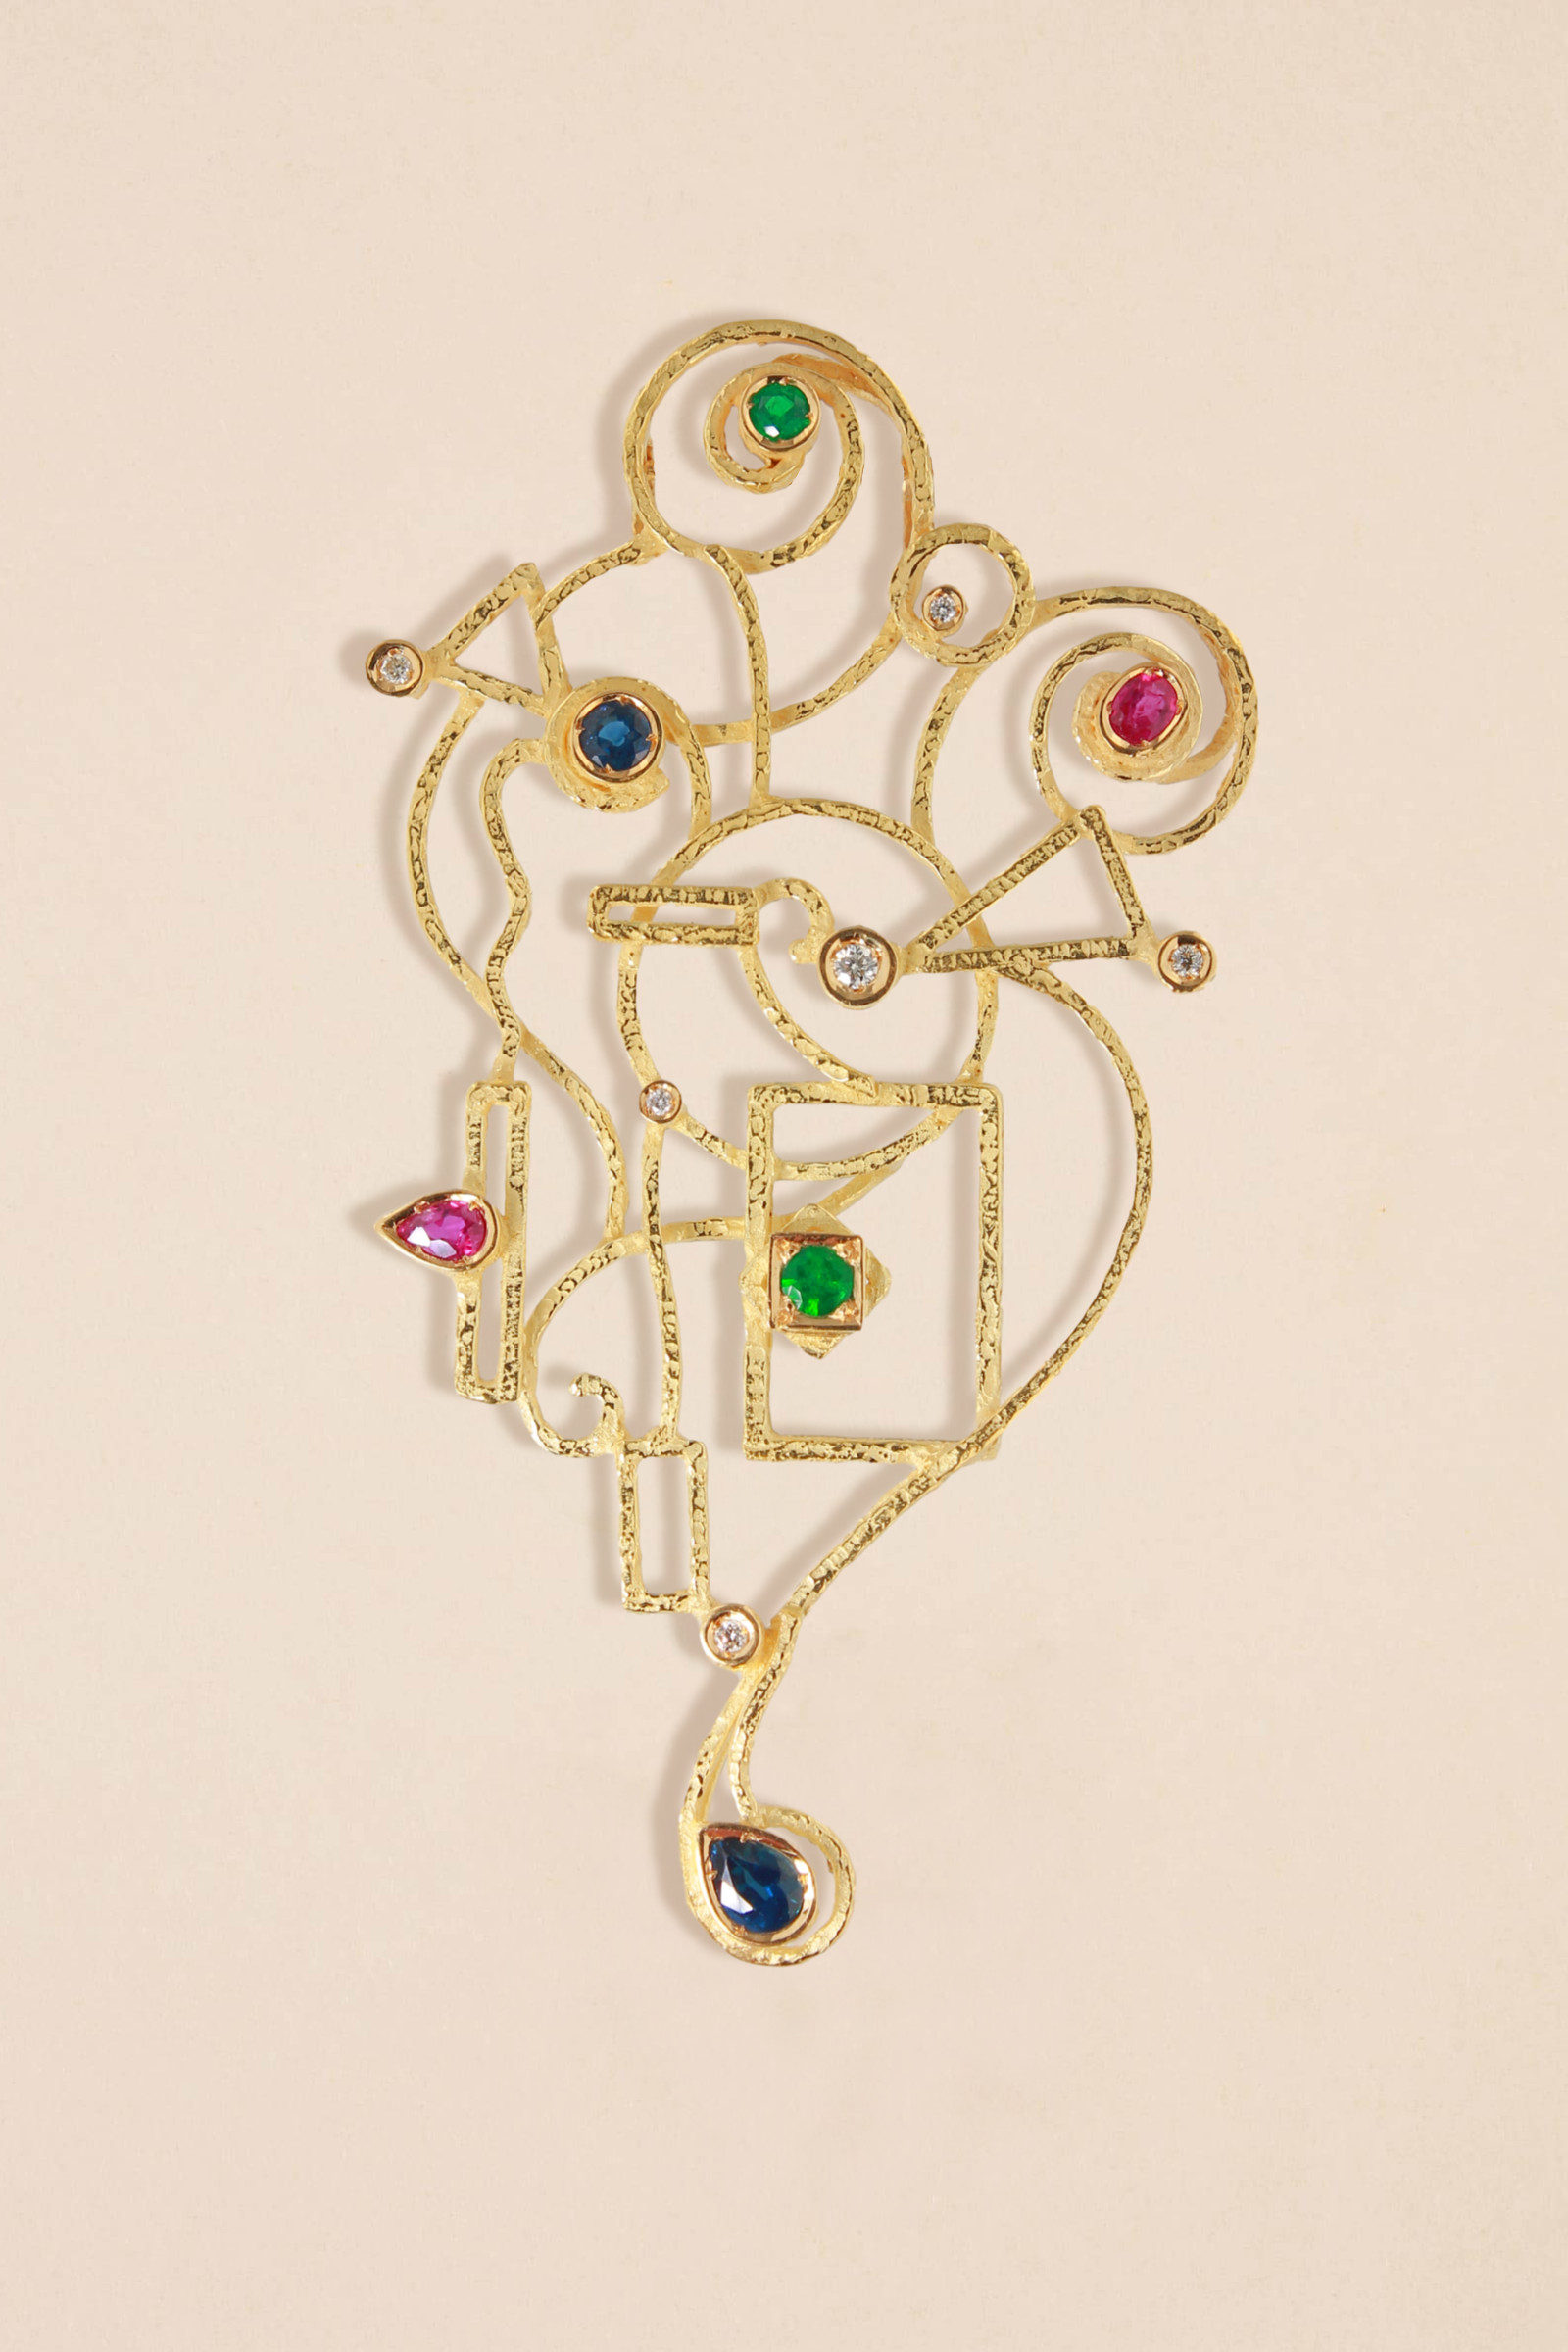 SH763-18-Kt-Yellow-Gold-Pendant-with-Rubies-Emeralds-Sapphires-and-Diamonds-1